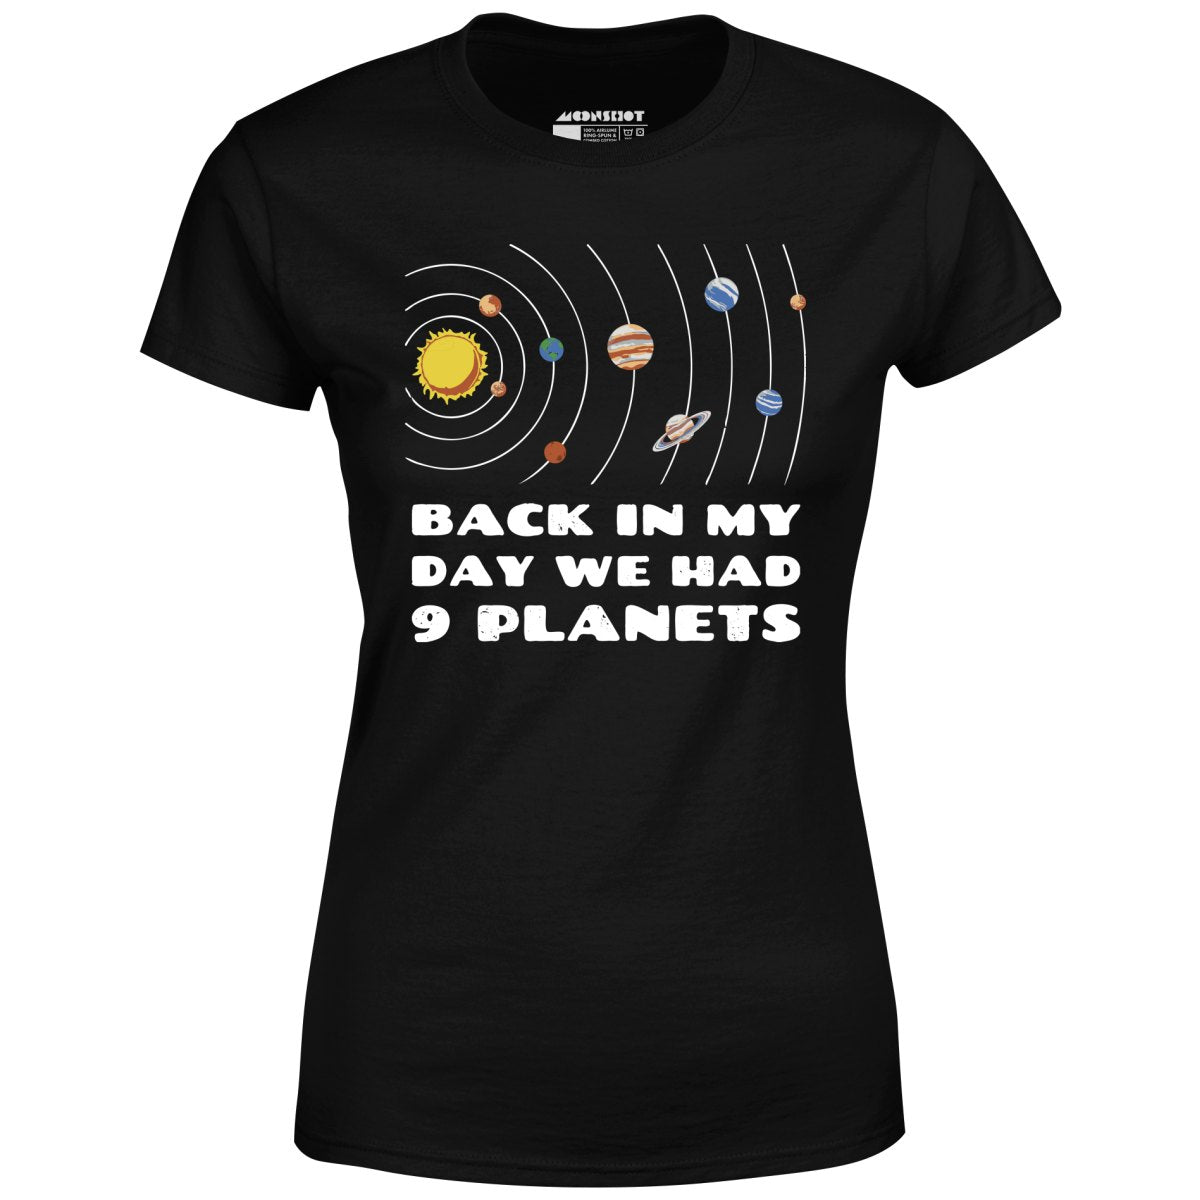 Back in My Day We Had 9 Planets - Women's T-Shirt